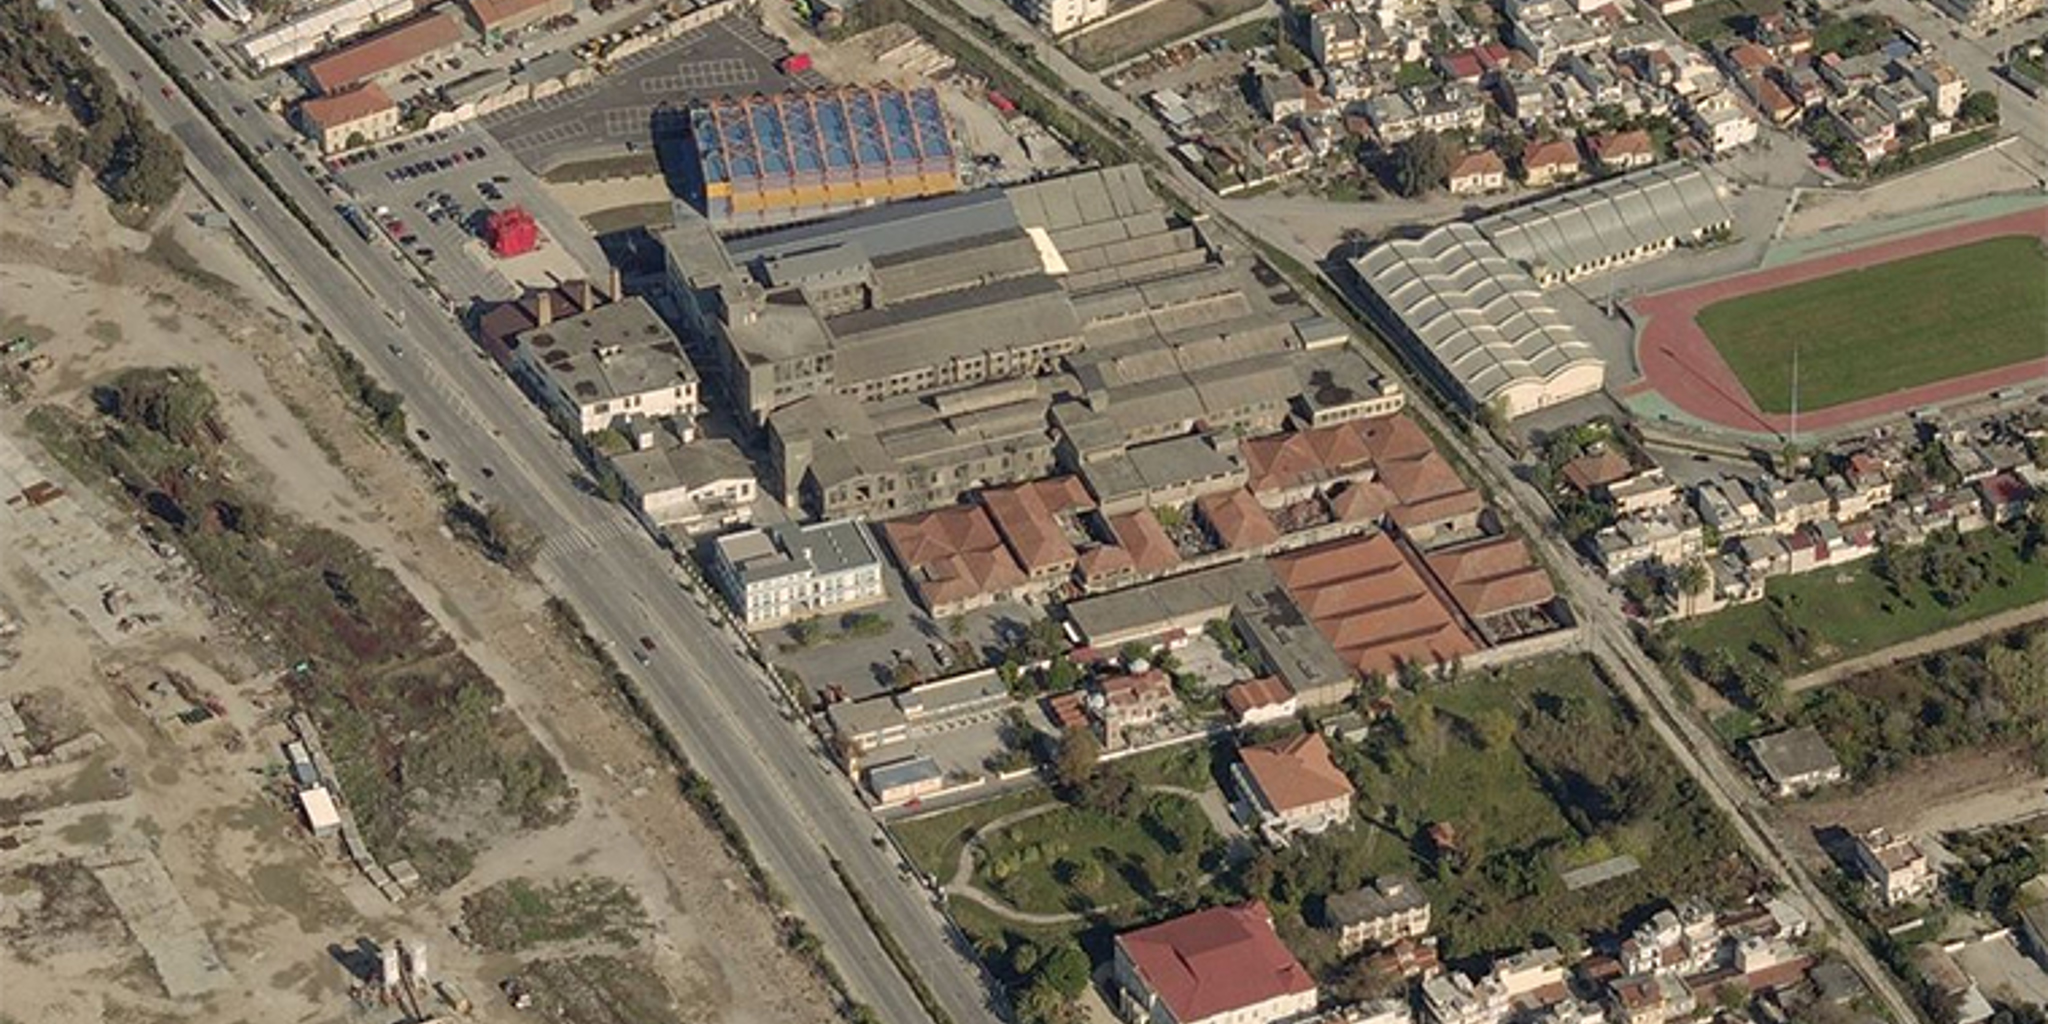 Premises of the former Ladopoulos Paper Mill will be refurbished through a PPP